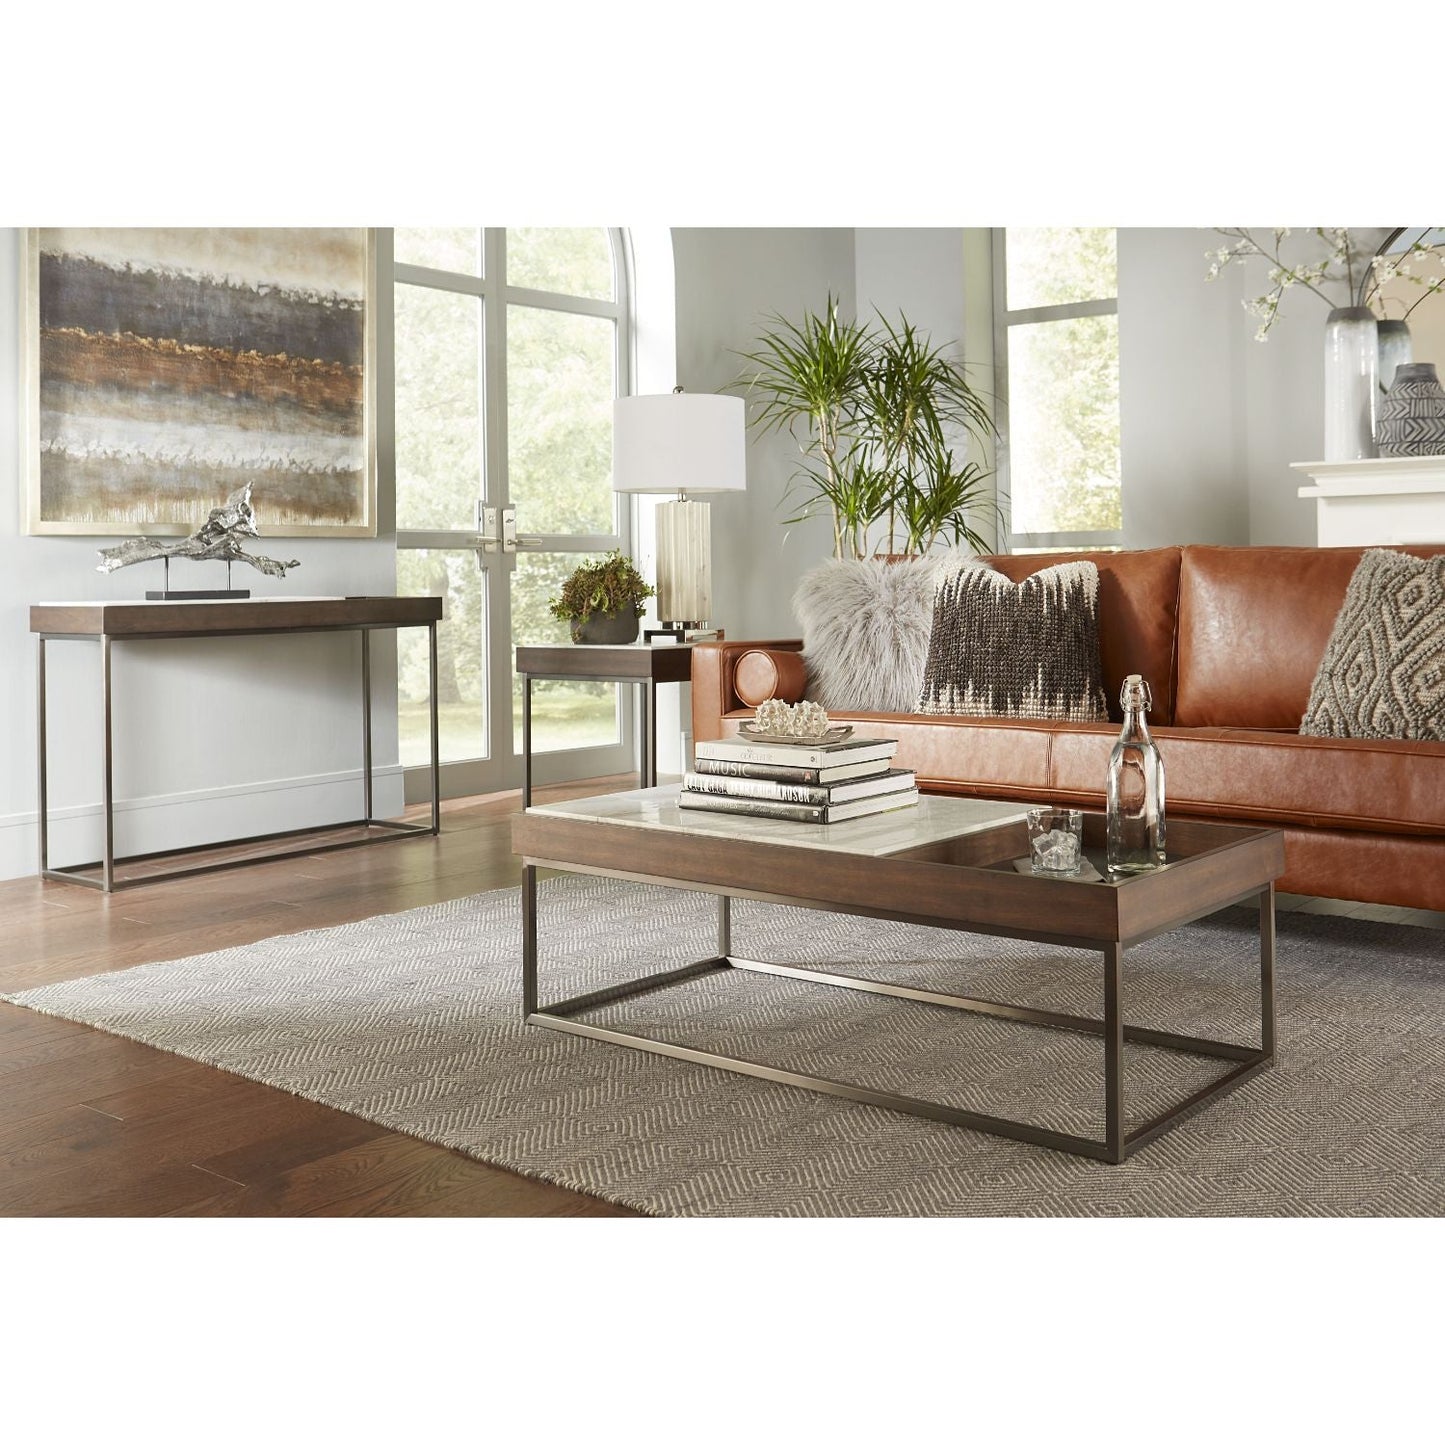 Modus Ennis 3PC Coffee & 2 End Table in Natural